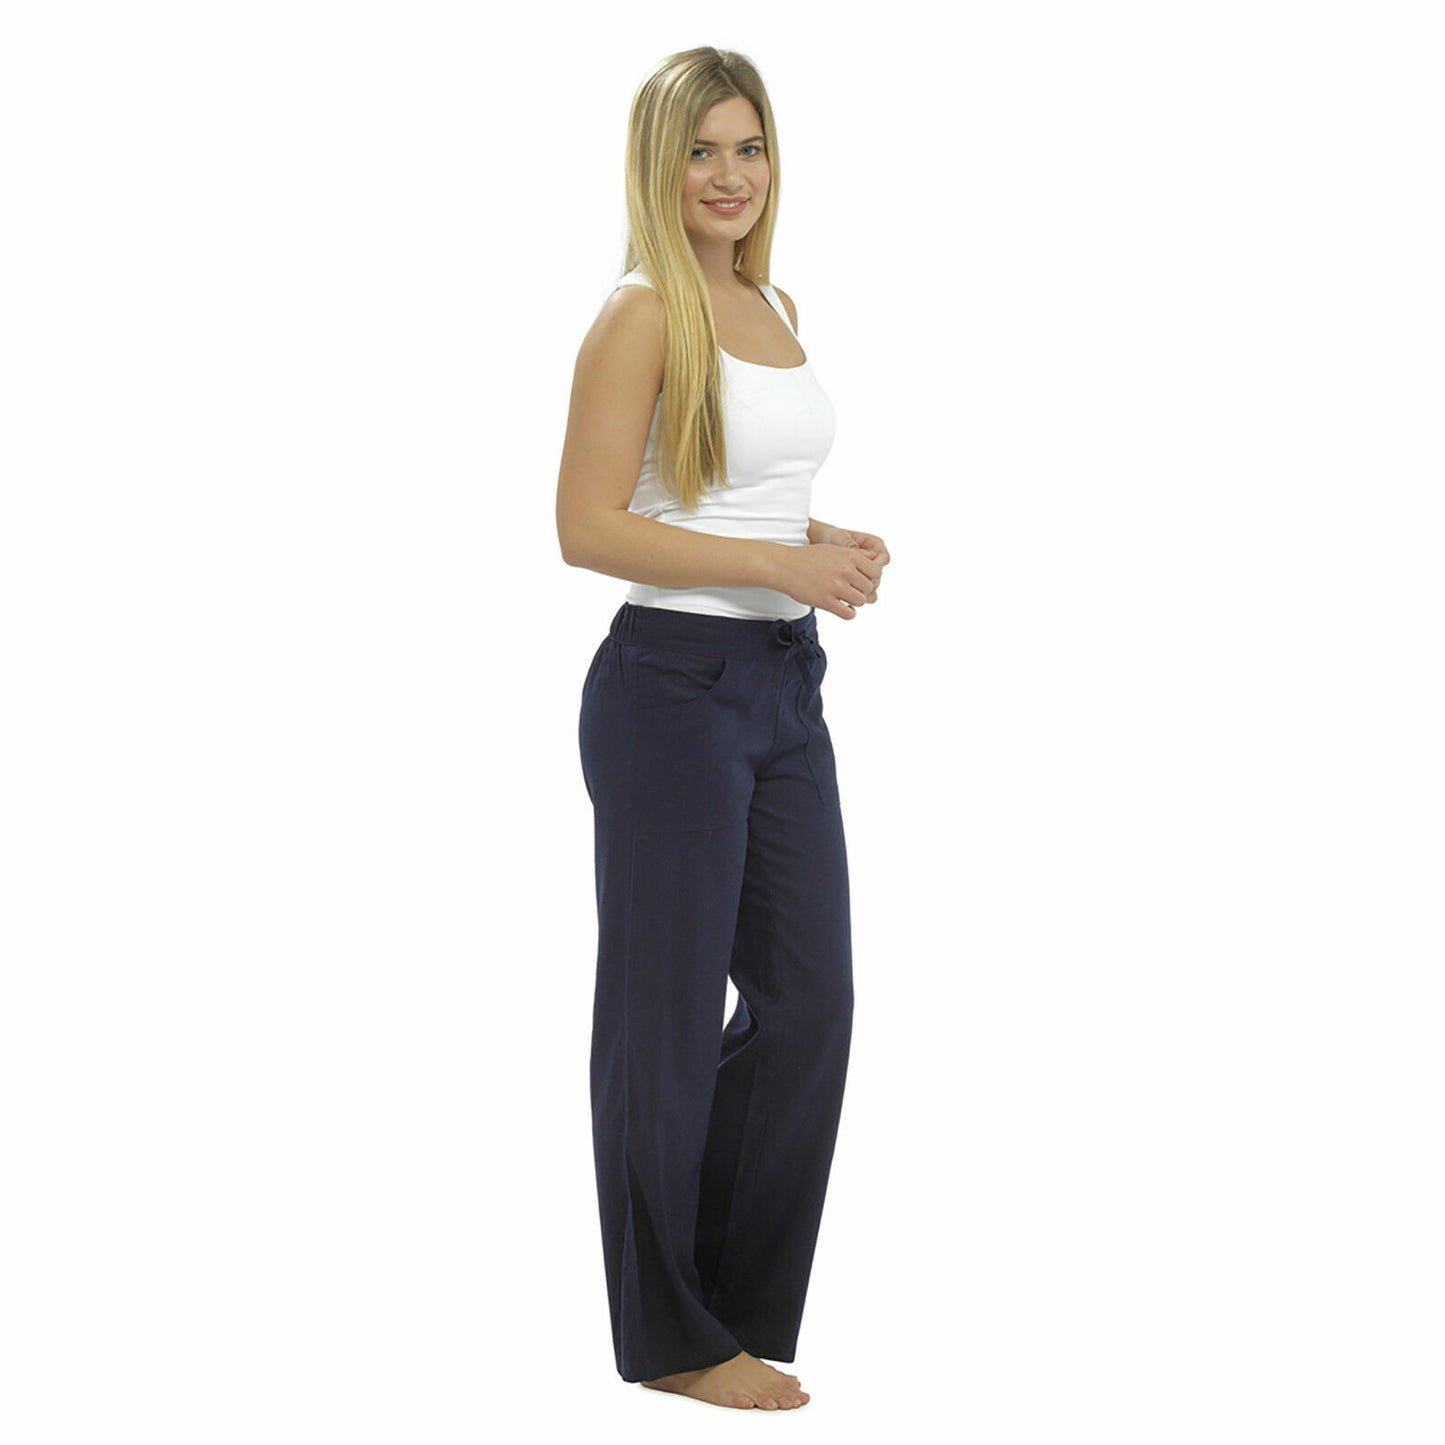 LADIES WOMEN LINEN TROUSERS CASUAL SUMMER HOLIDAY PANT ELASTICATED WAIST BOTTOMS